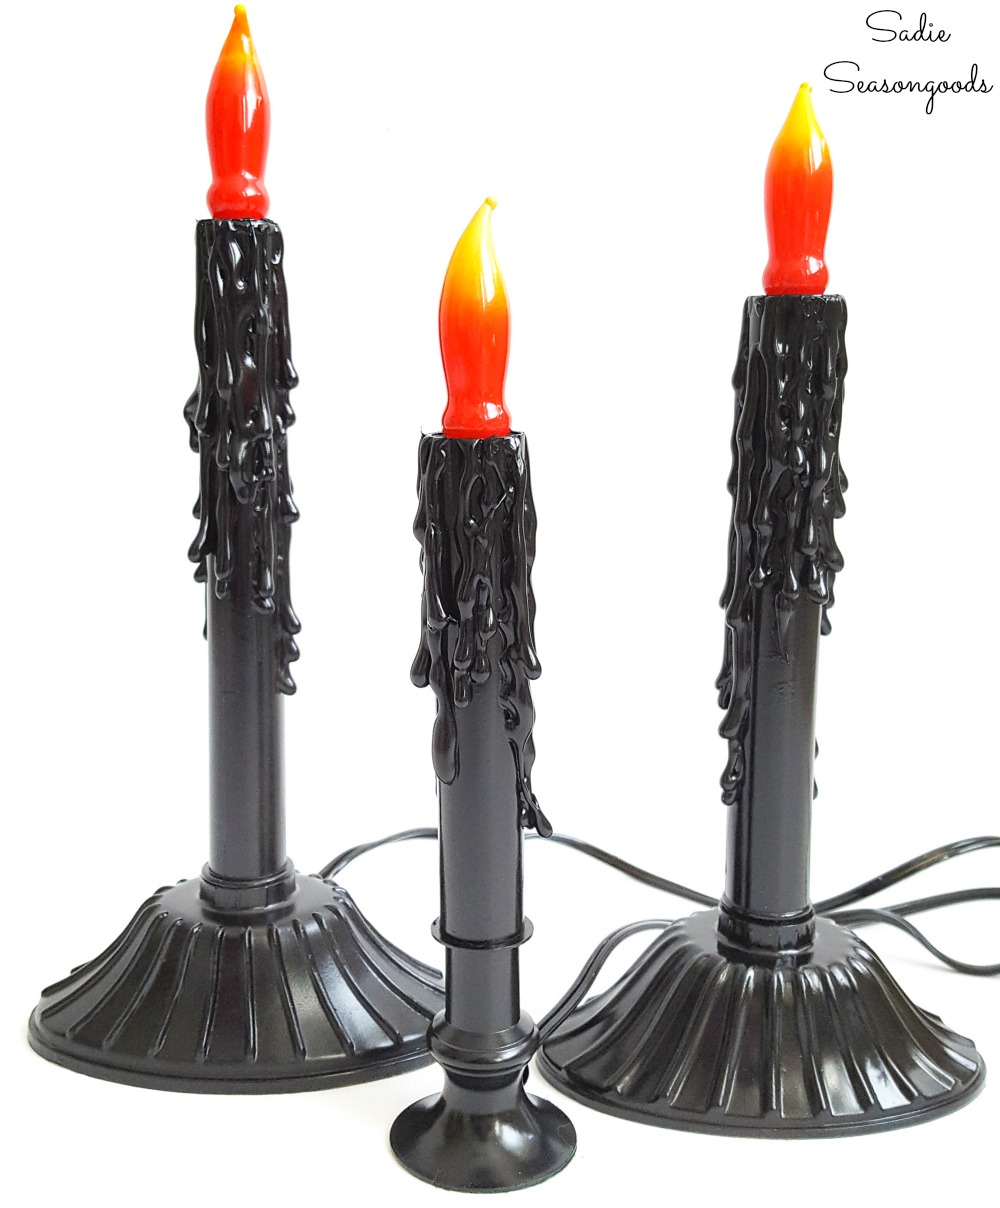 Creepy candles for DIY Halloween decorations